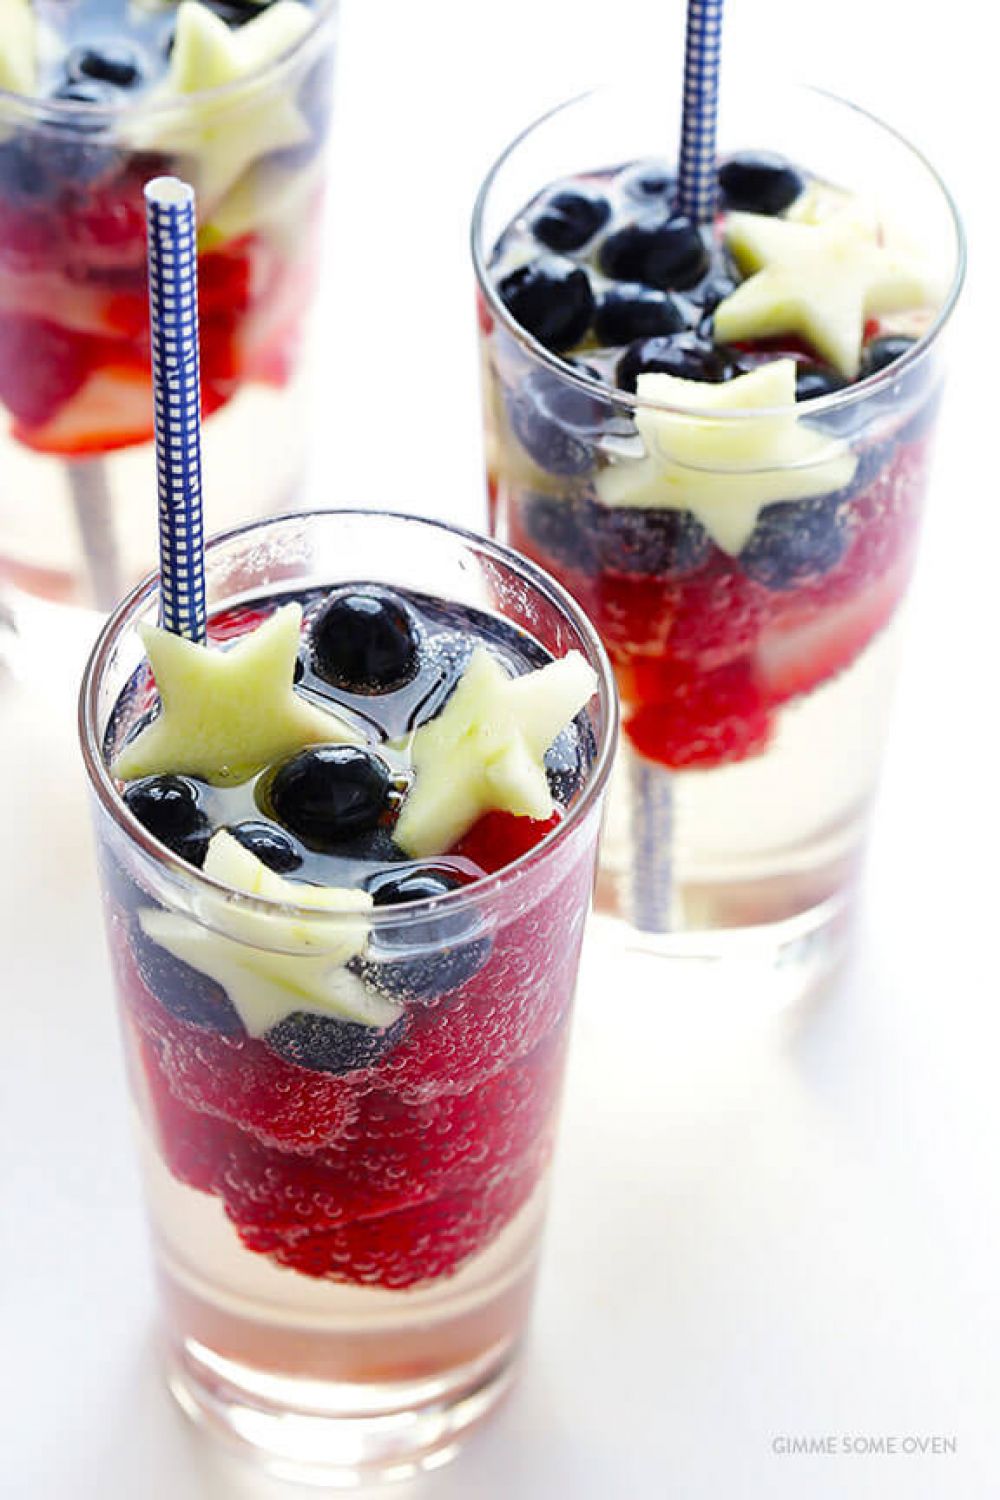 Sparkling Red, White and Blue Sangria